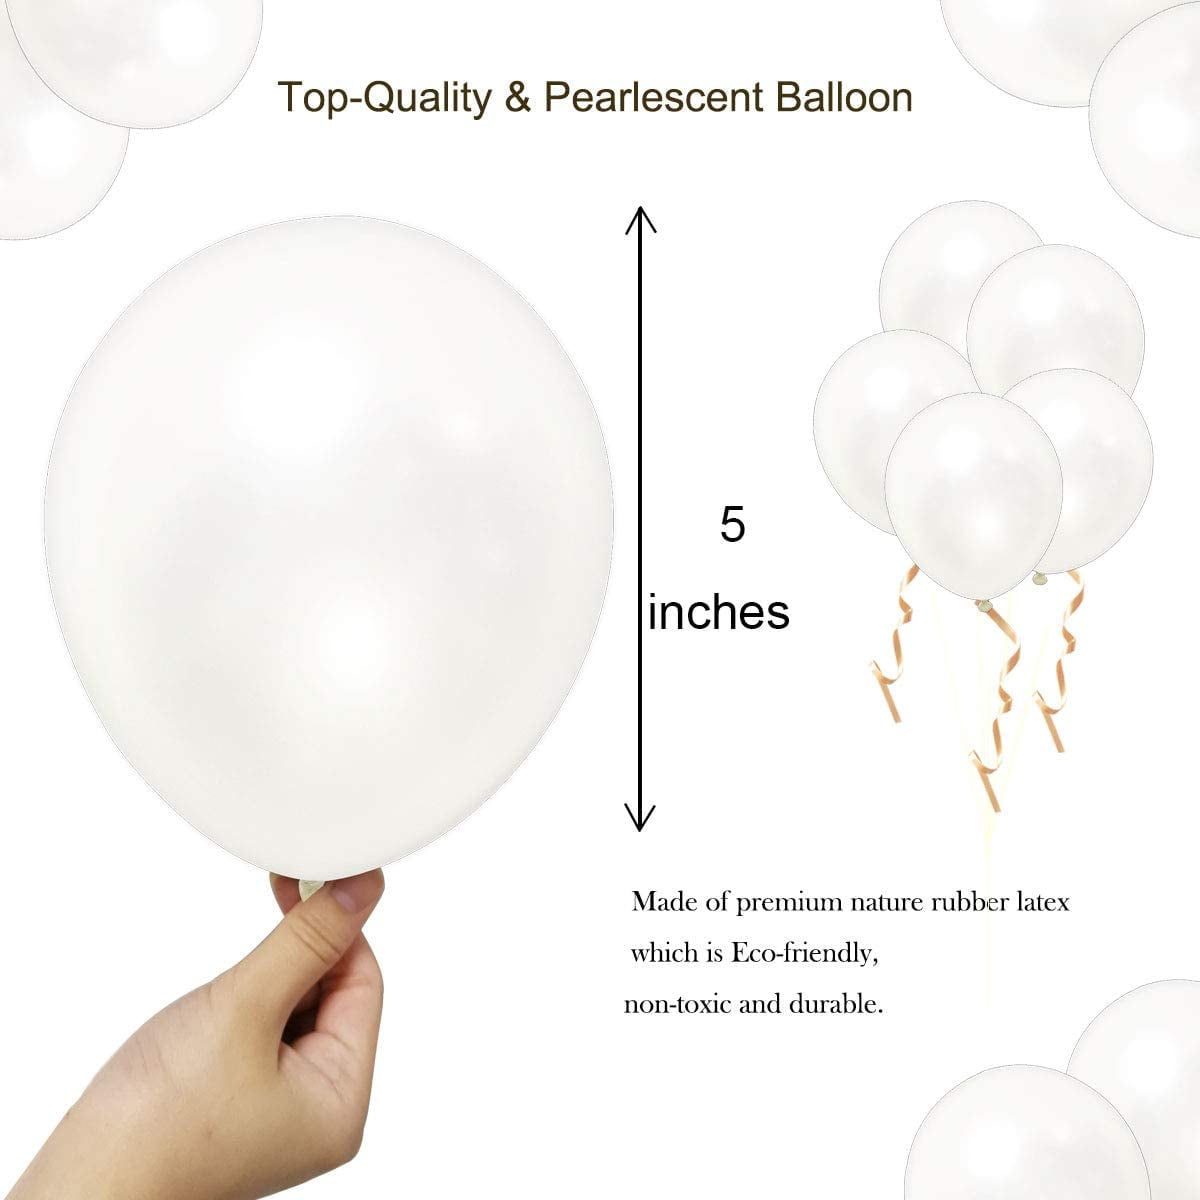 Electrainbow 8 Pack 36 Inch White Large Balloons & 50 Pack 10 Inch Colorful Balloons for Labor Day 2 Golden Ribbons Included,60 Pieces Carnival Easter Wedding Birthday